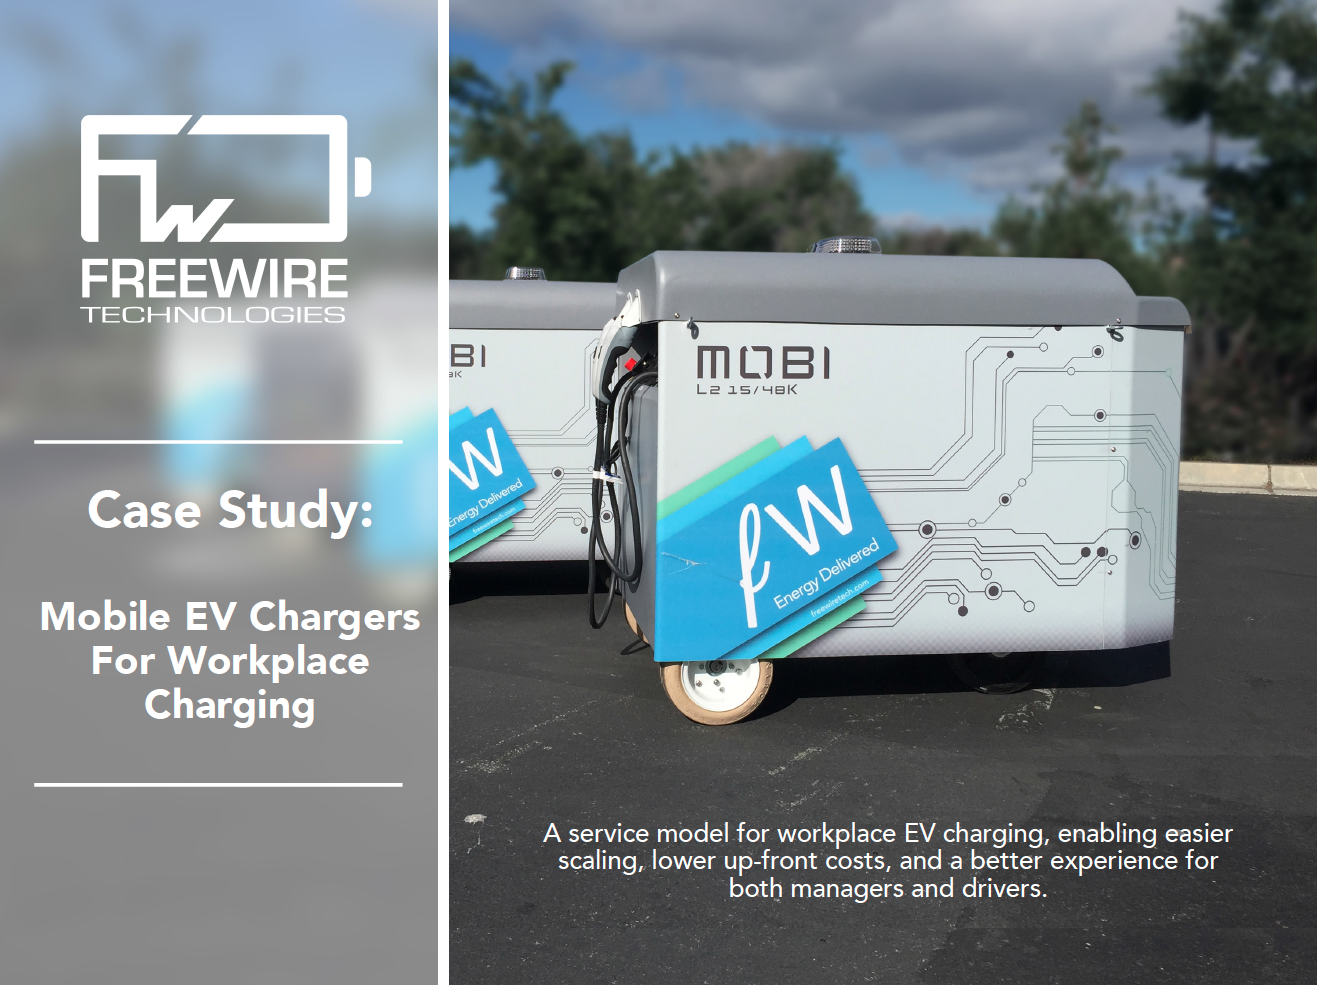  First pilot of mobile EV charging station is successful  